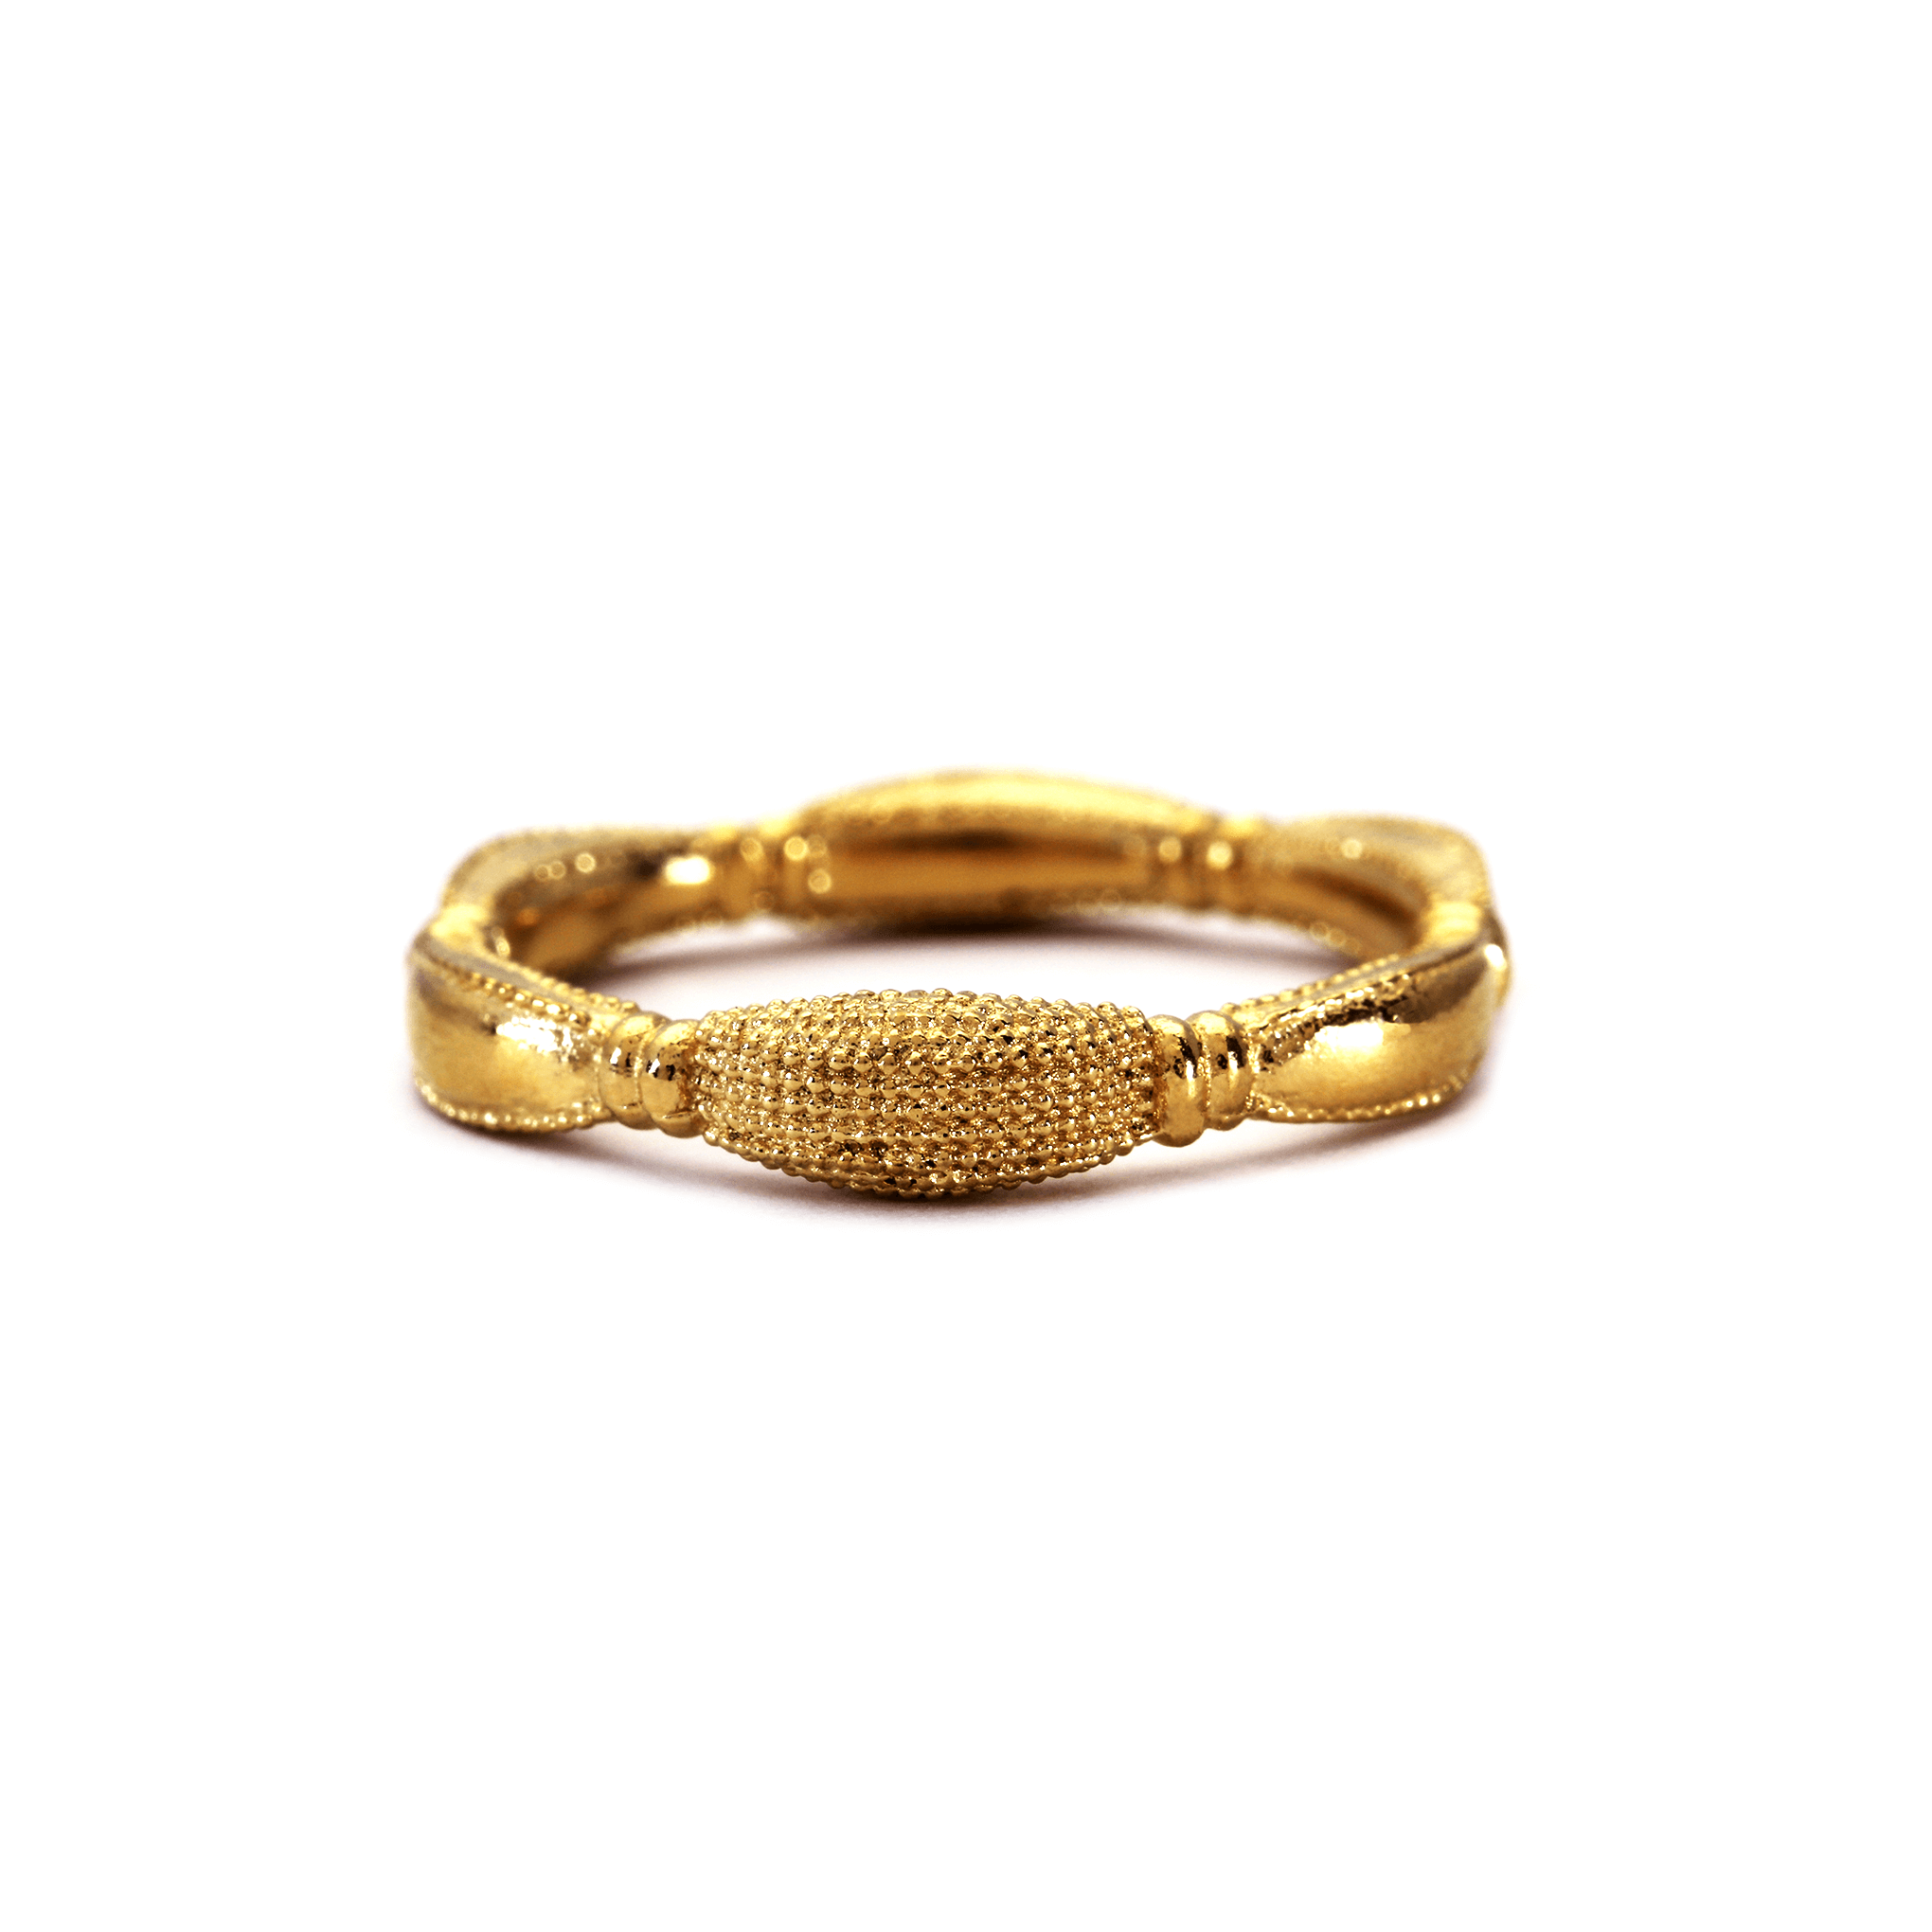 Mantid King Ring in yellow gold